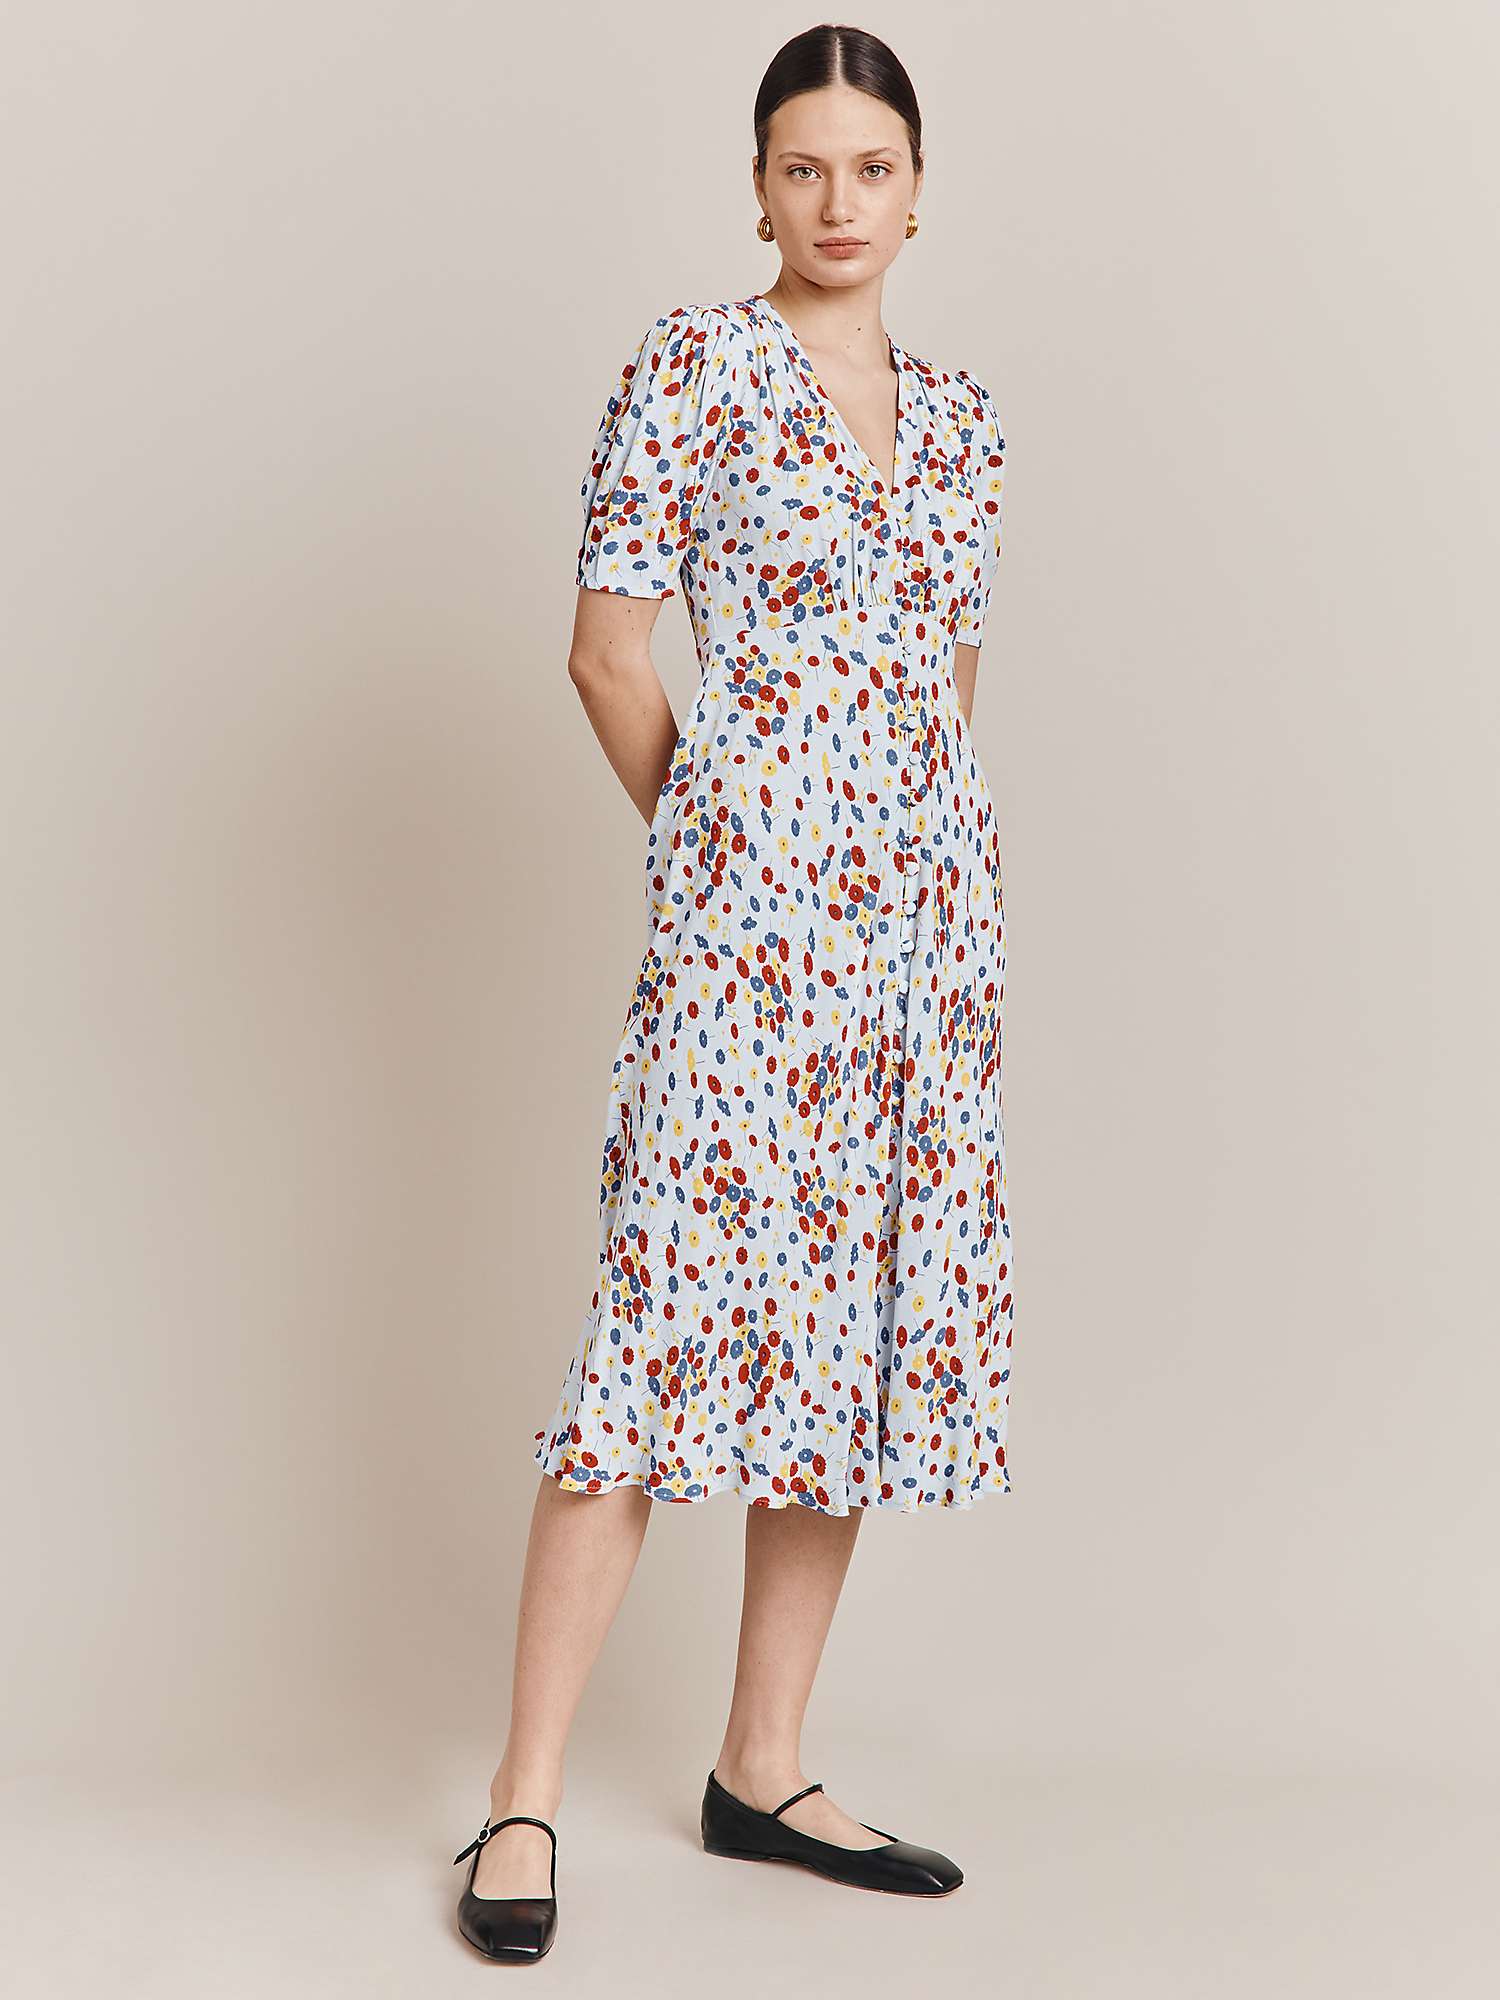 Ghost Lucy Floral Midi Dress, Blue/Multi at John Lewis & Partners